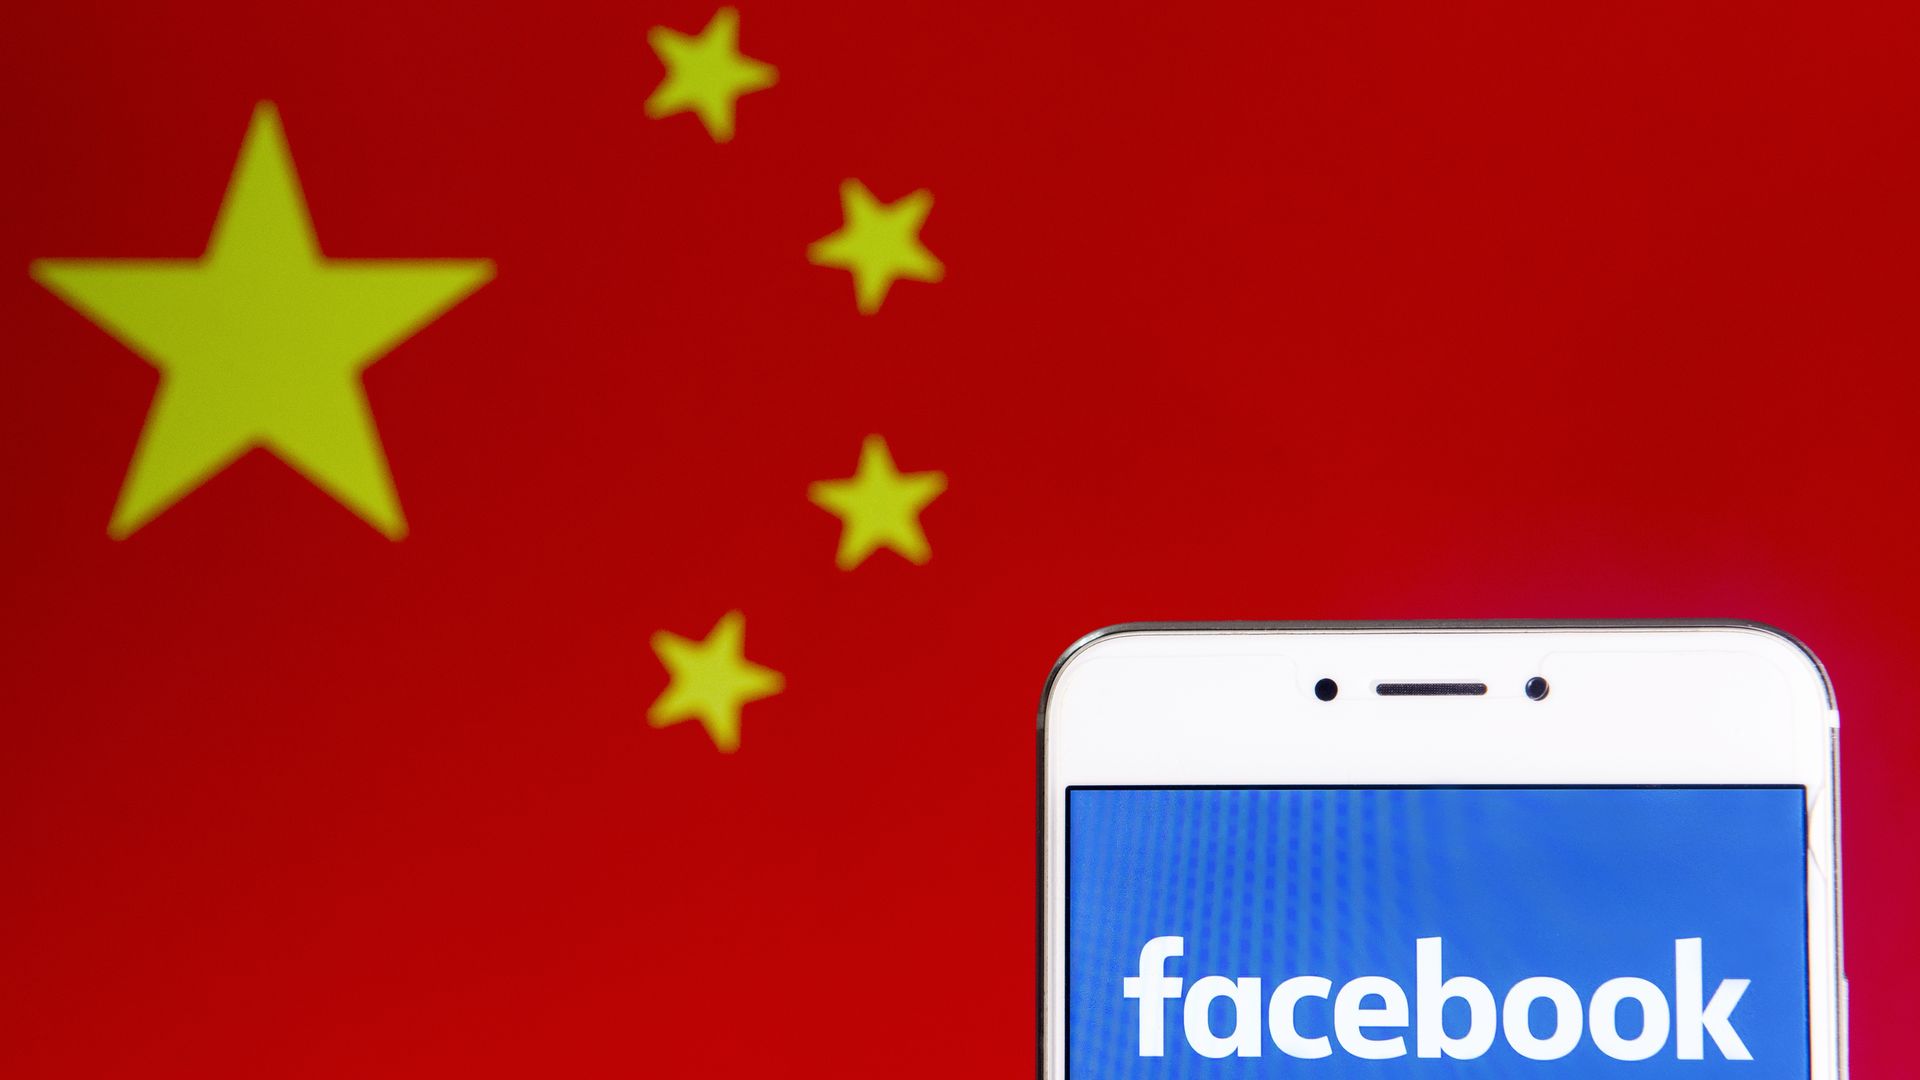 Photo illustration of the Facebook logo and the People's Republic of China flag.